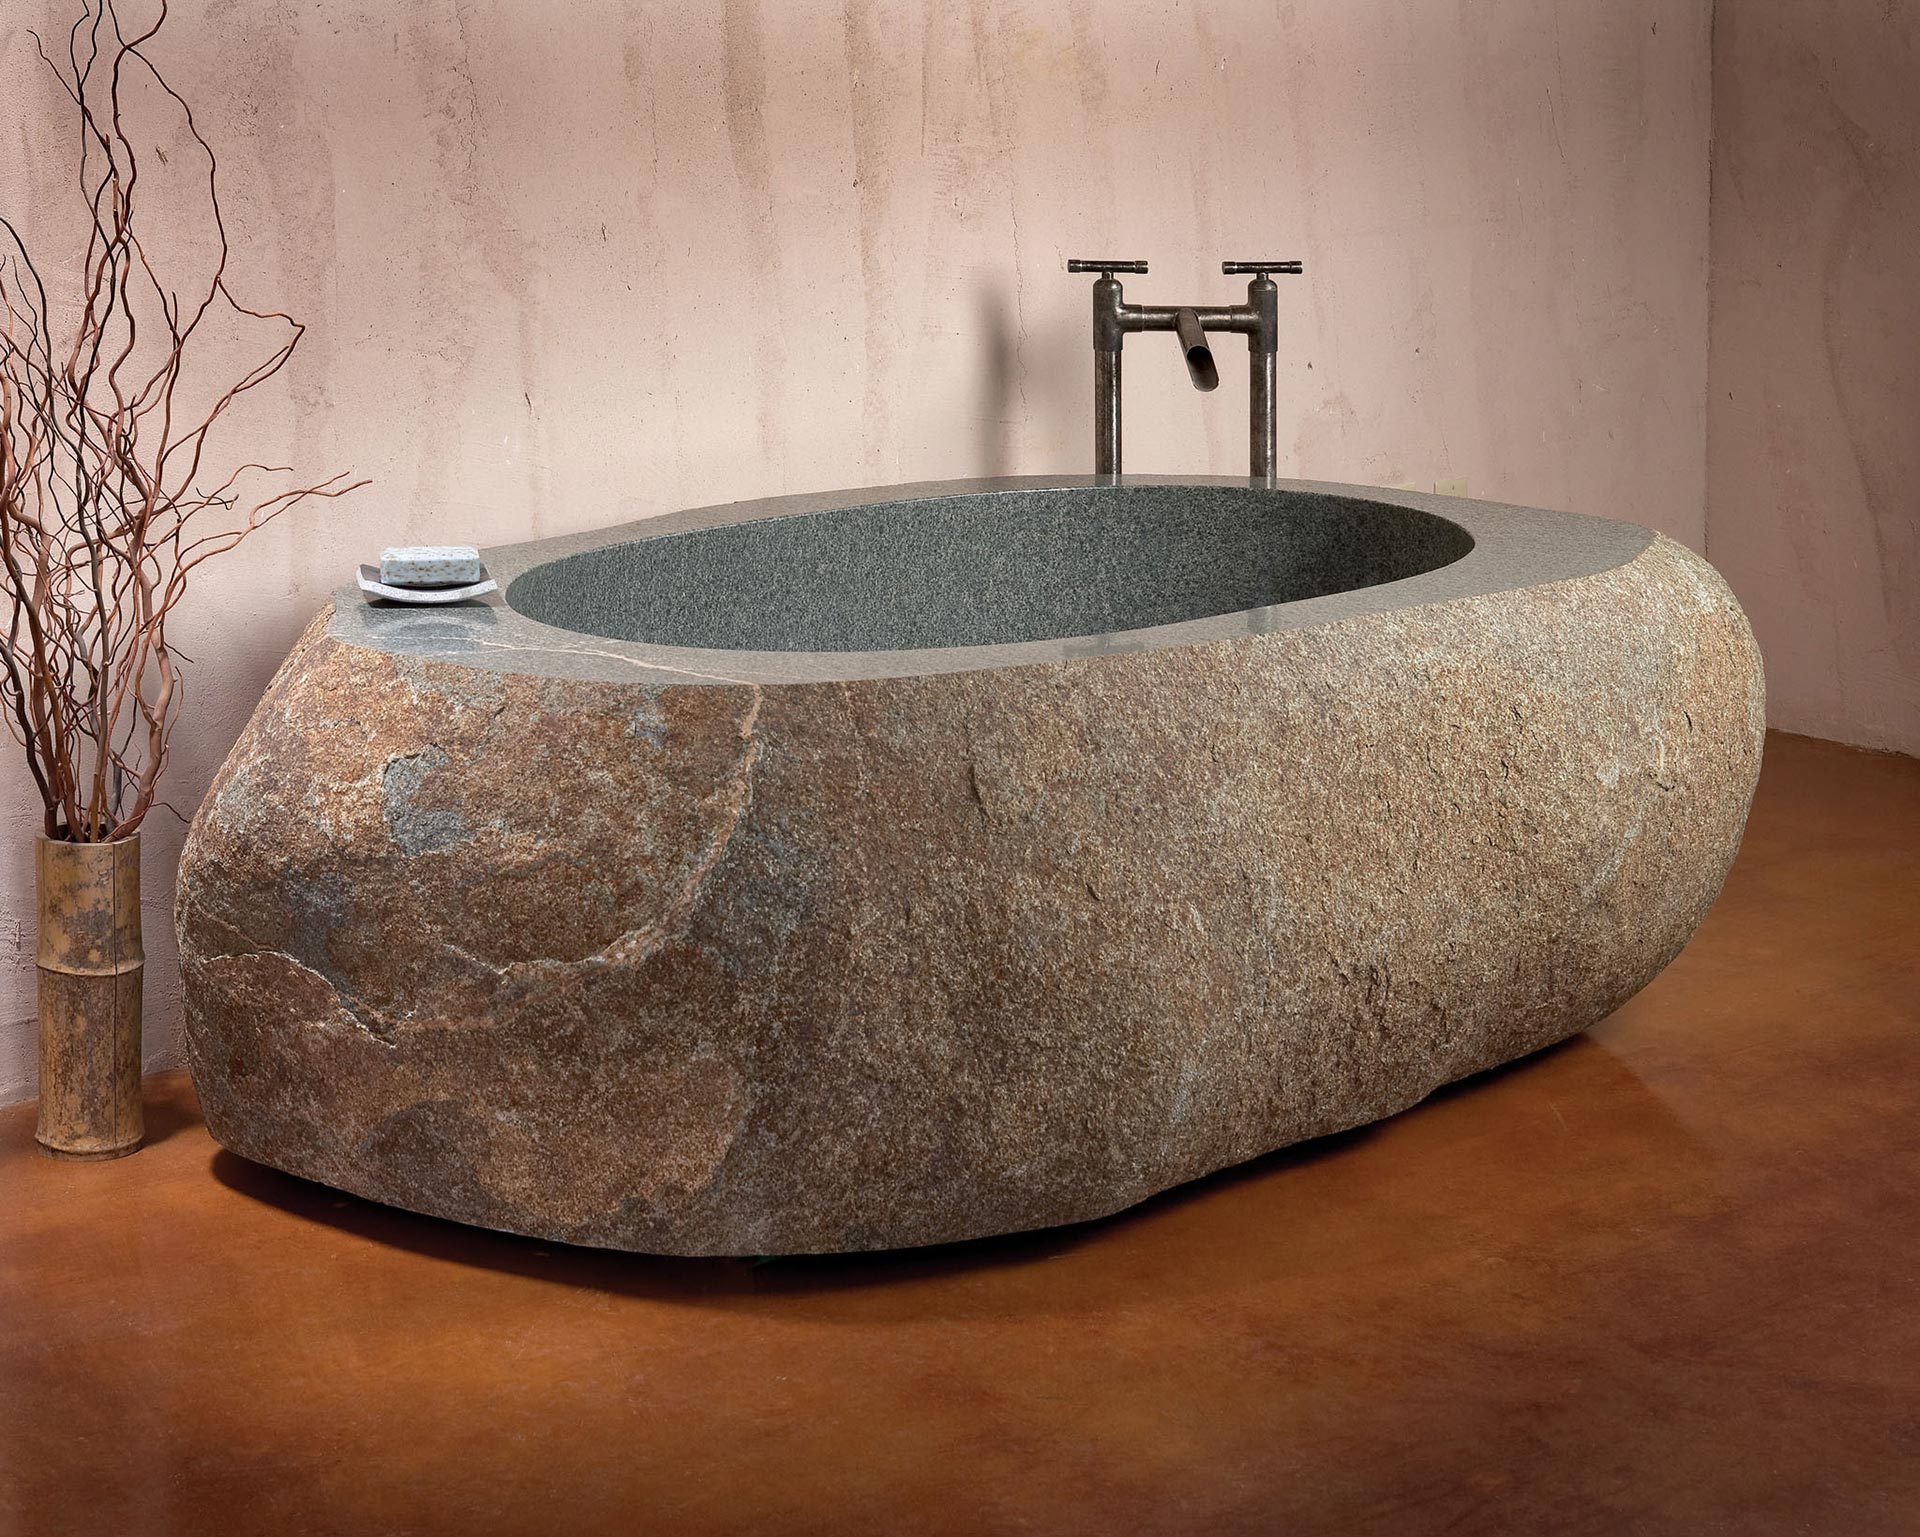 natural-stone-bathtub-by-stone-forest